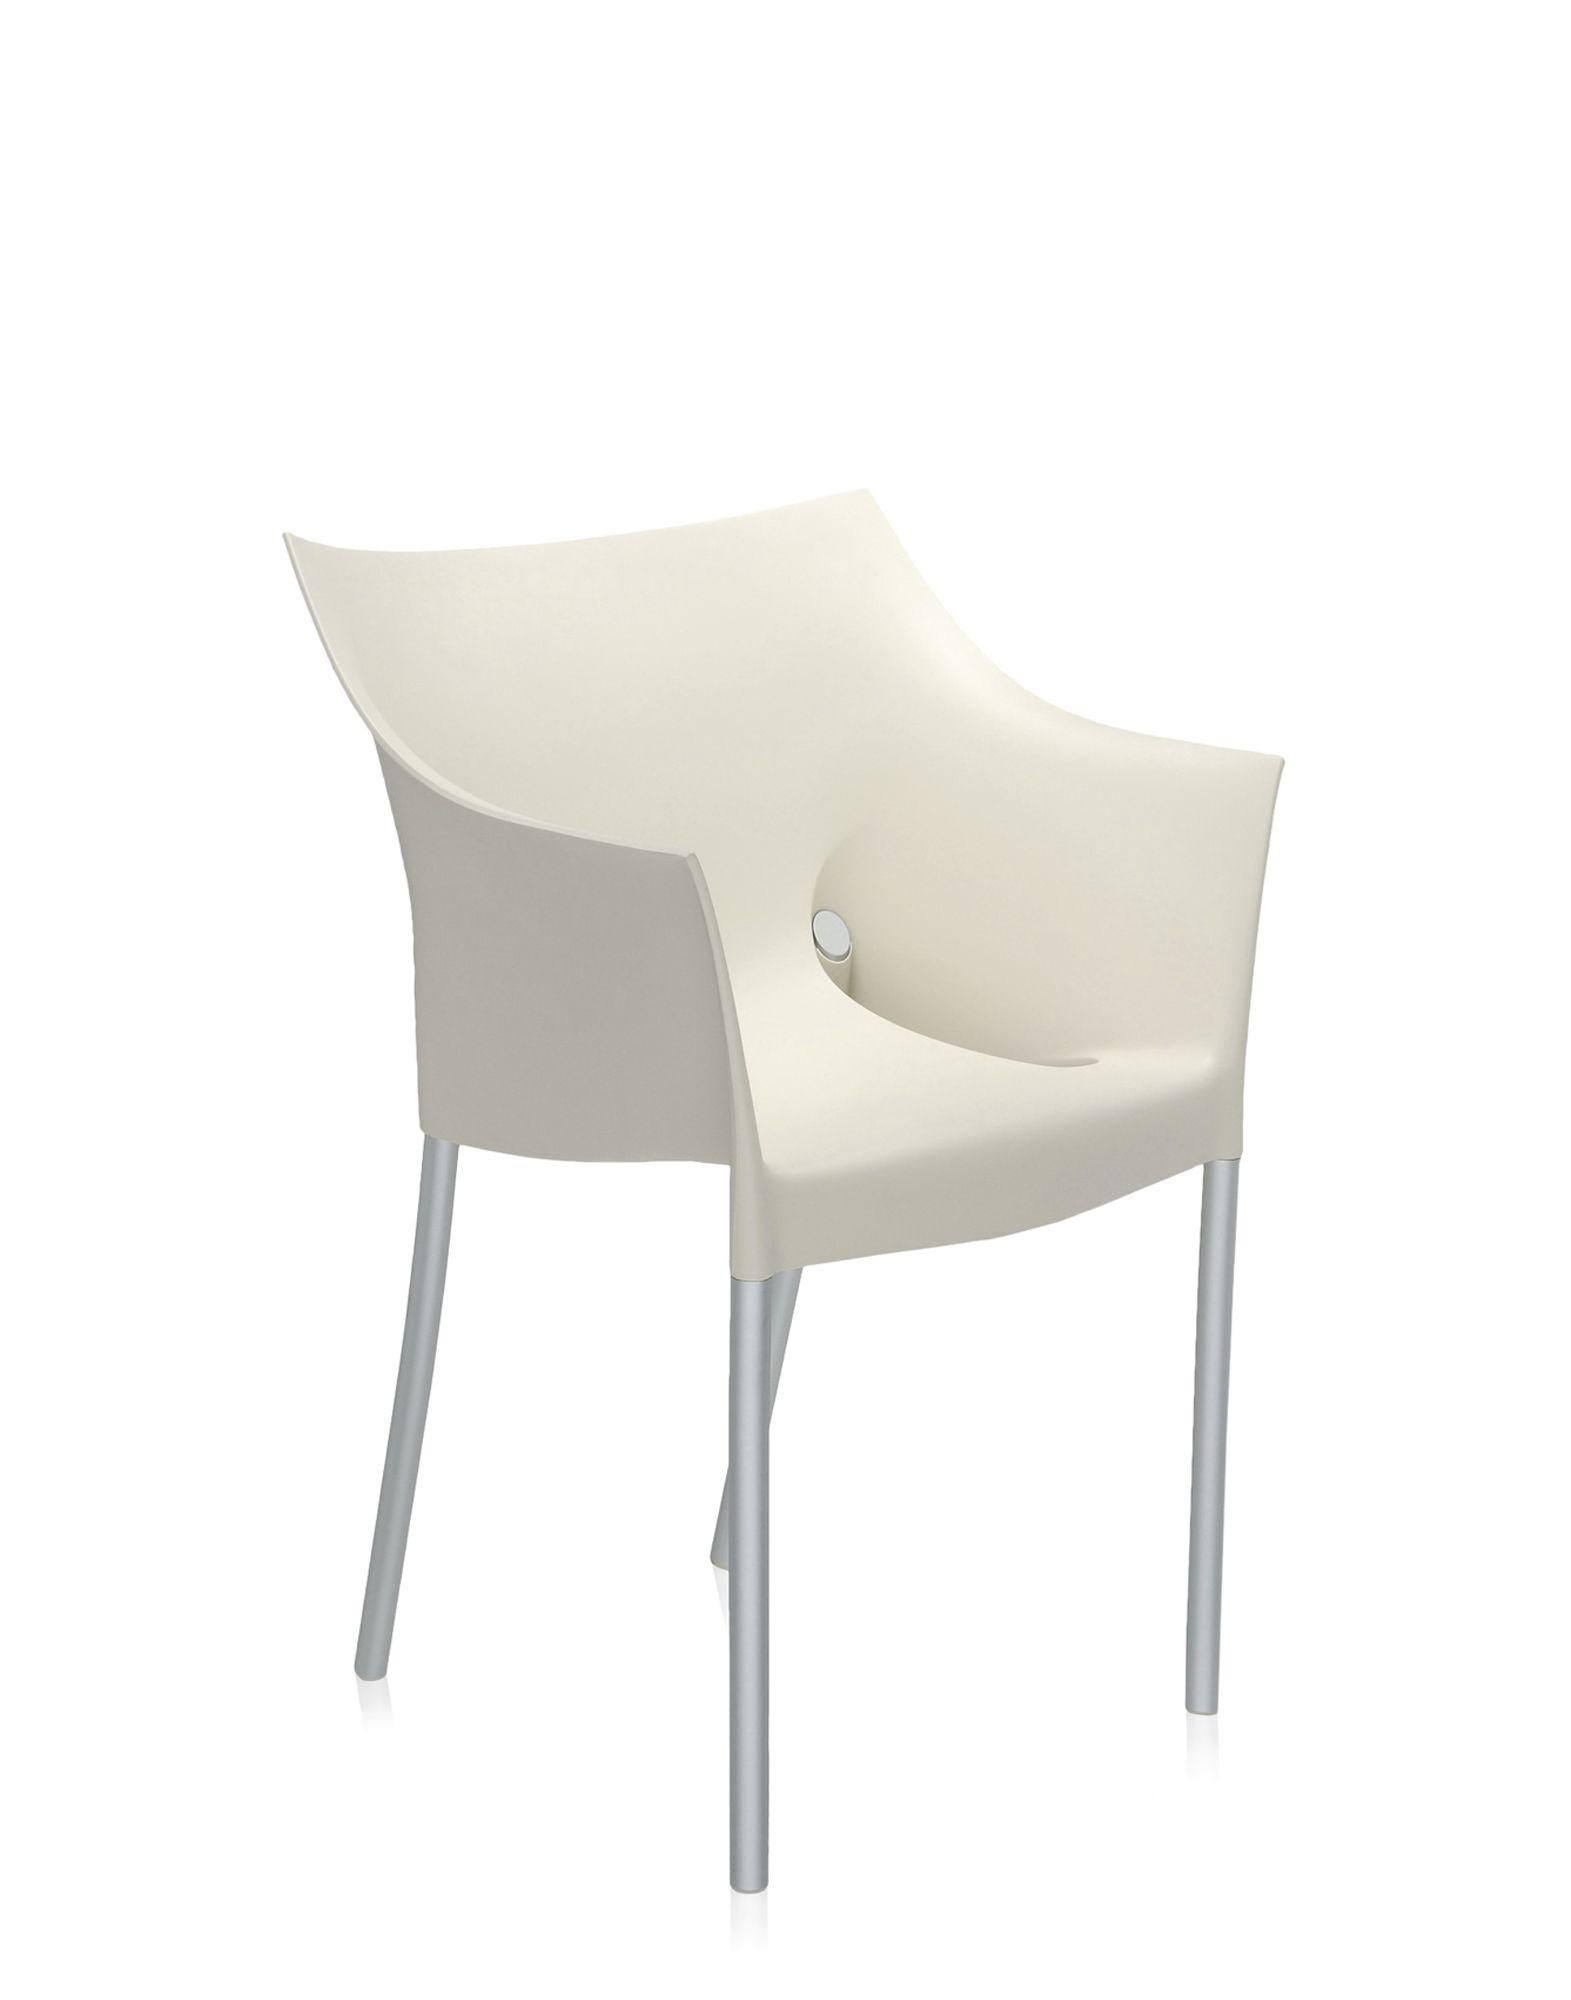 The Dr. NO small armchair is a Kartell classic, known for its perfect combination of functionality and beauty. Dr. NO is not affected by temperature changes, is stackable up to four elements and characterised by its enveloping comfortable seat,